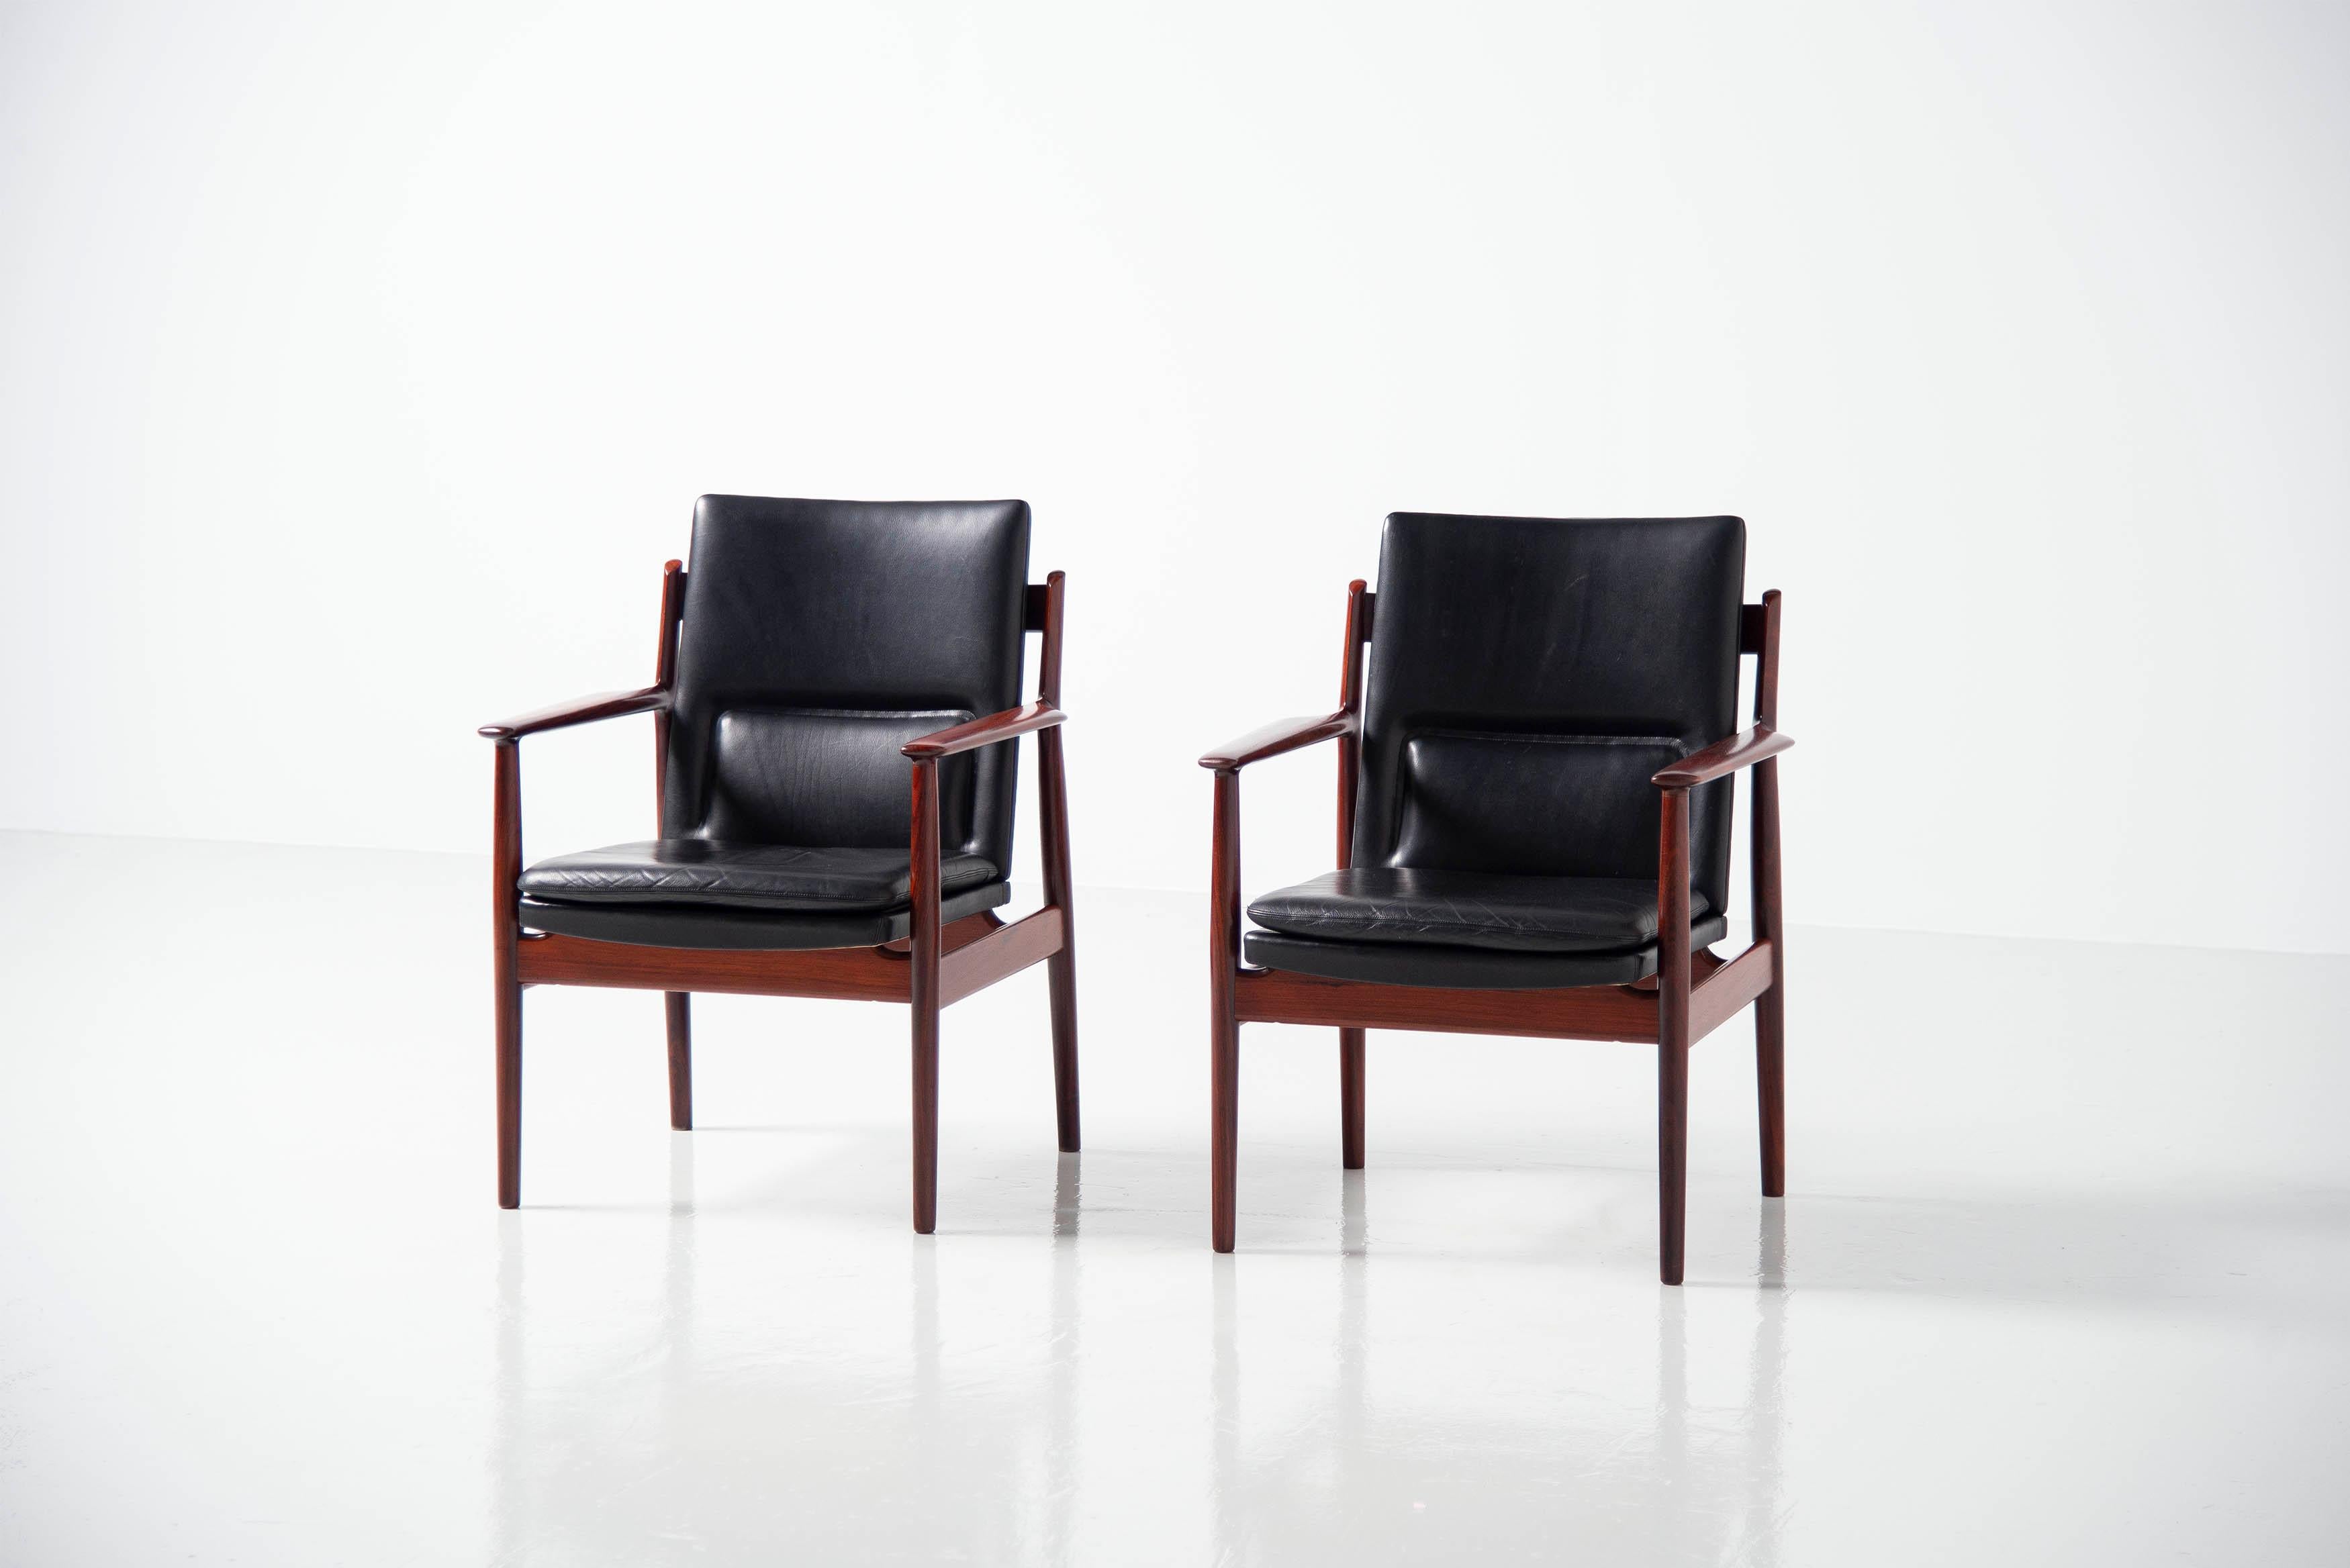 Set of 431 arm chairs designed by Arne Vodder and manufactured by Sibast Mobler, Denmark 1960. The chairs have a solid rosewood frame and black leather upholstery. These chairs are highly refined with beautiful grained rosewood and woodworking into